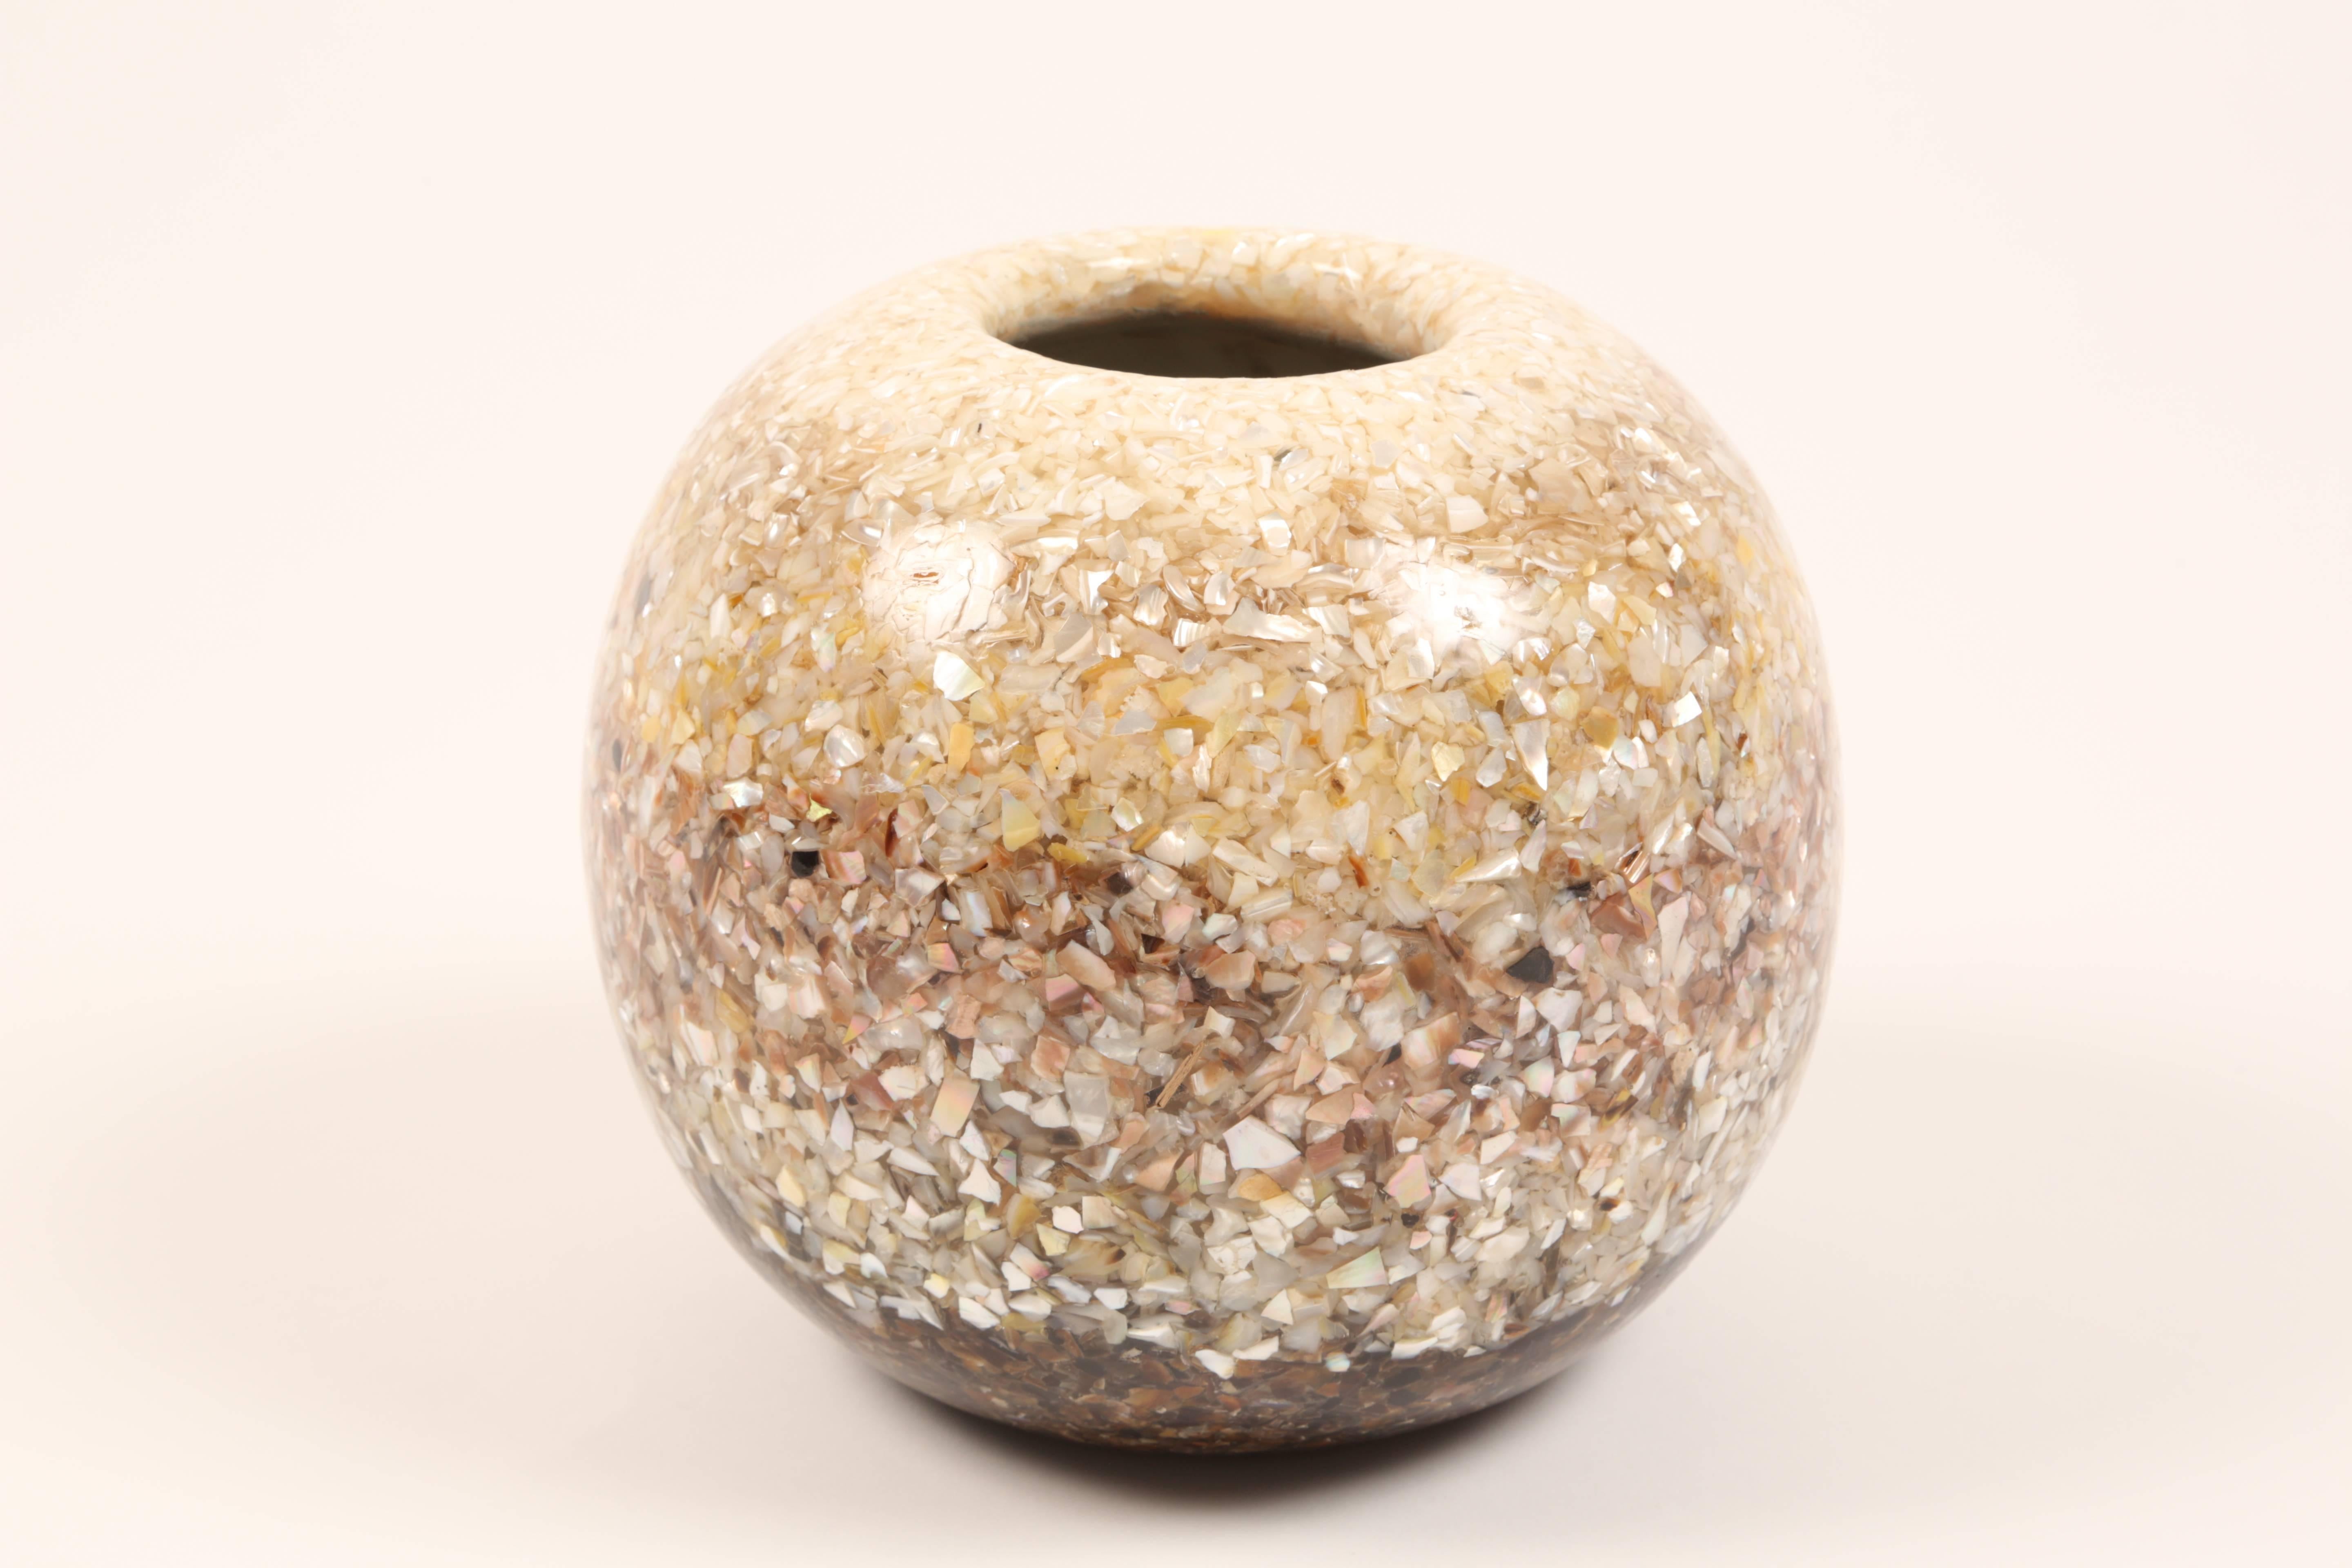 Striking vase composed of mother-of-pearl and sea shell fragments in resin composite. The fragments are arranged in a gradient which flows from white and gold hues at the top, to rose hues at the middle and on to dark purple and brown hues at the